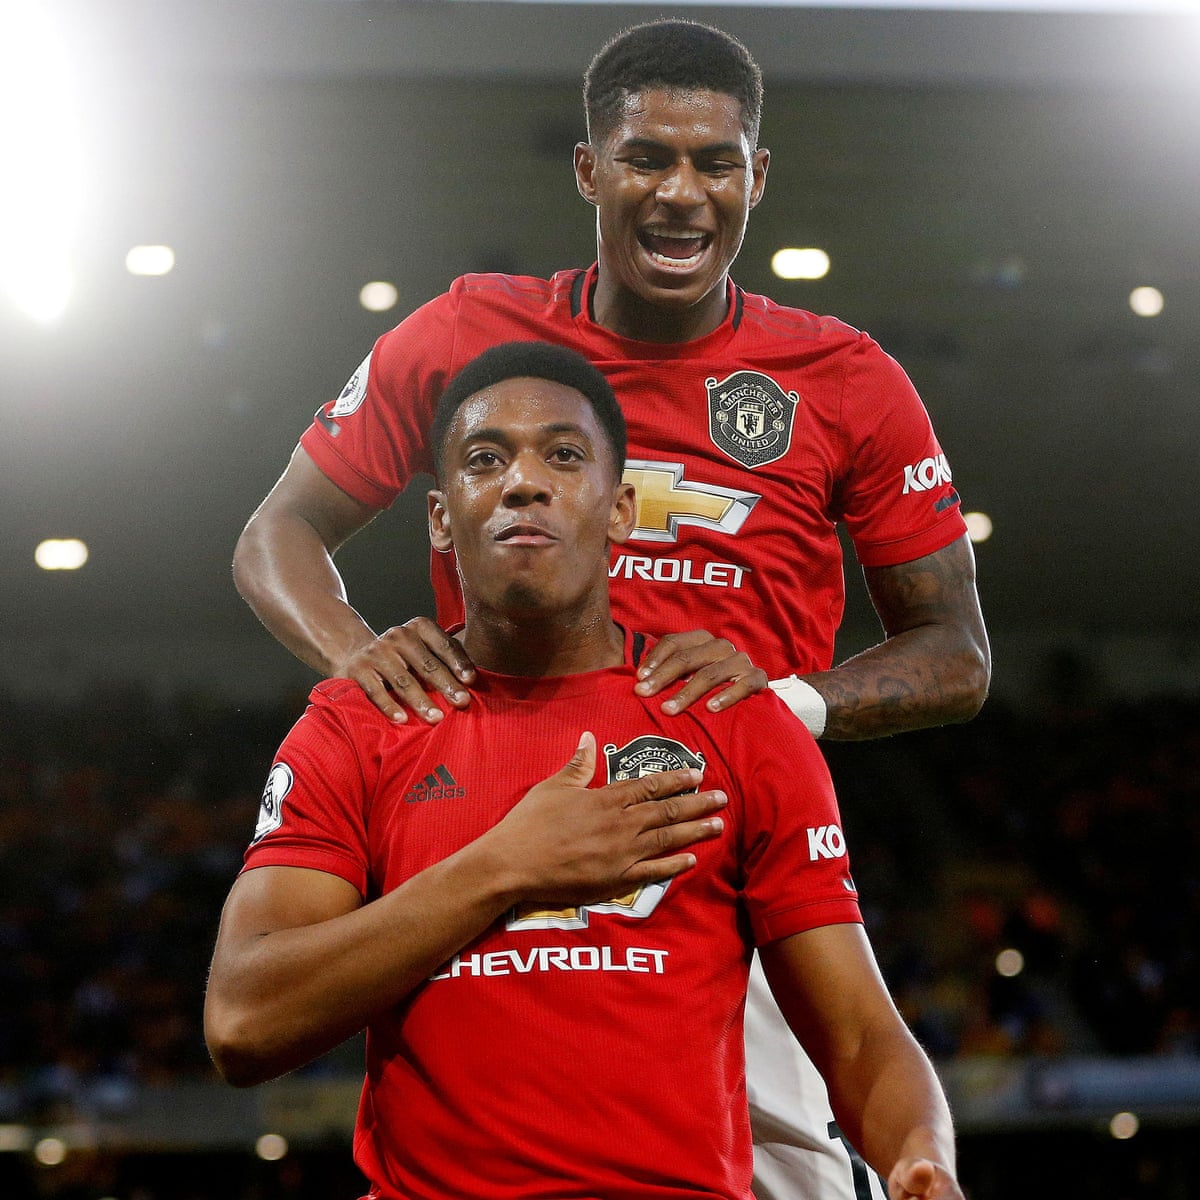 Another stat, that FBRef has pointed out (again, ONLY looking at league) is SCA (Shot-Creating Actions), meaning "actions directly leading to a shot, such as passes, dribbles and drawing fouls". Sancho leads at Dortmund at 124 total.Rashford (93) and Martial (92) closest at Utd